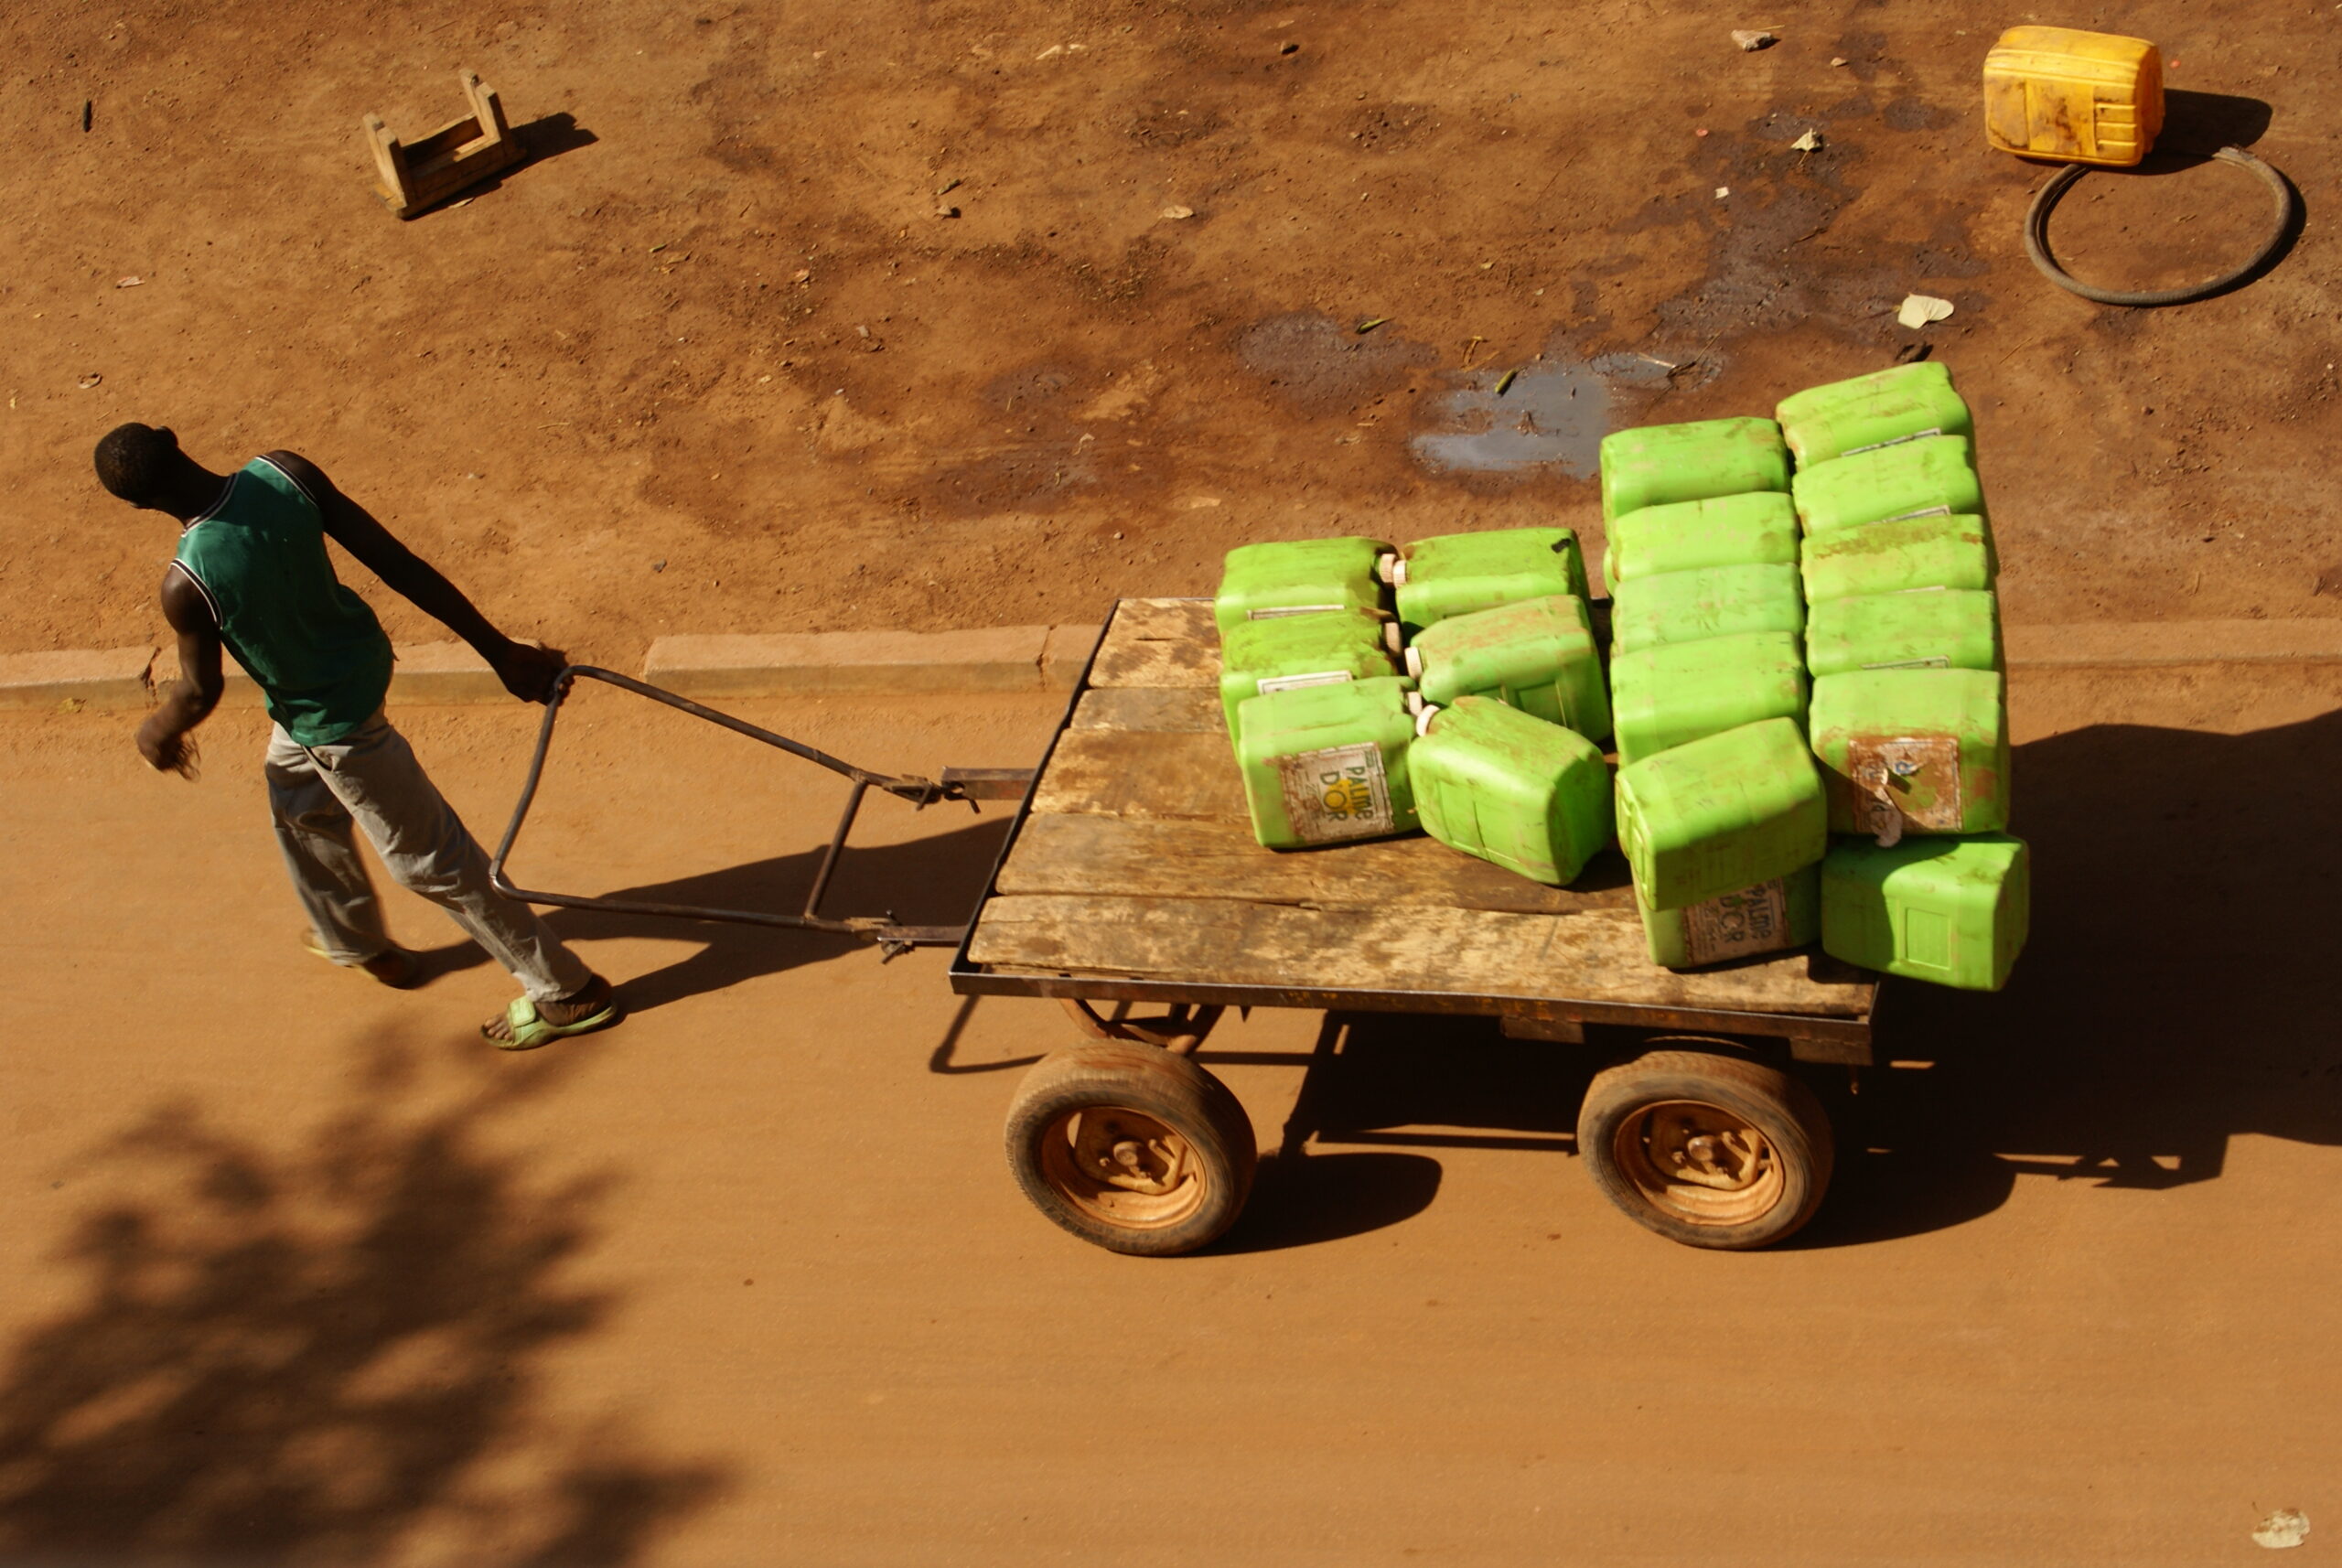 A man drags a trolley of water containers in the street in Ouagadougou, Burkina Faso.